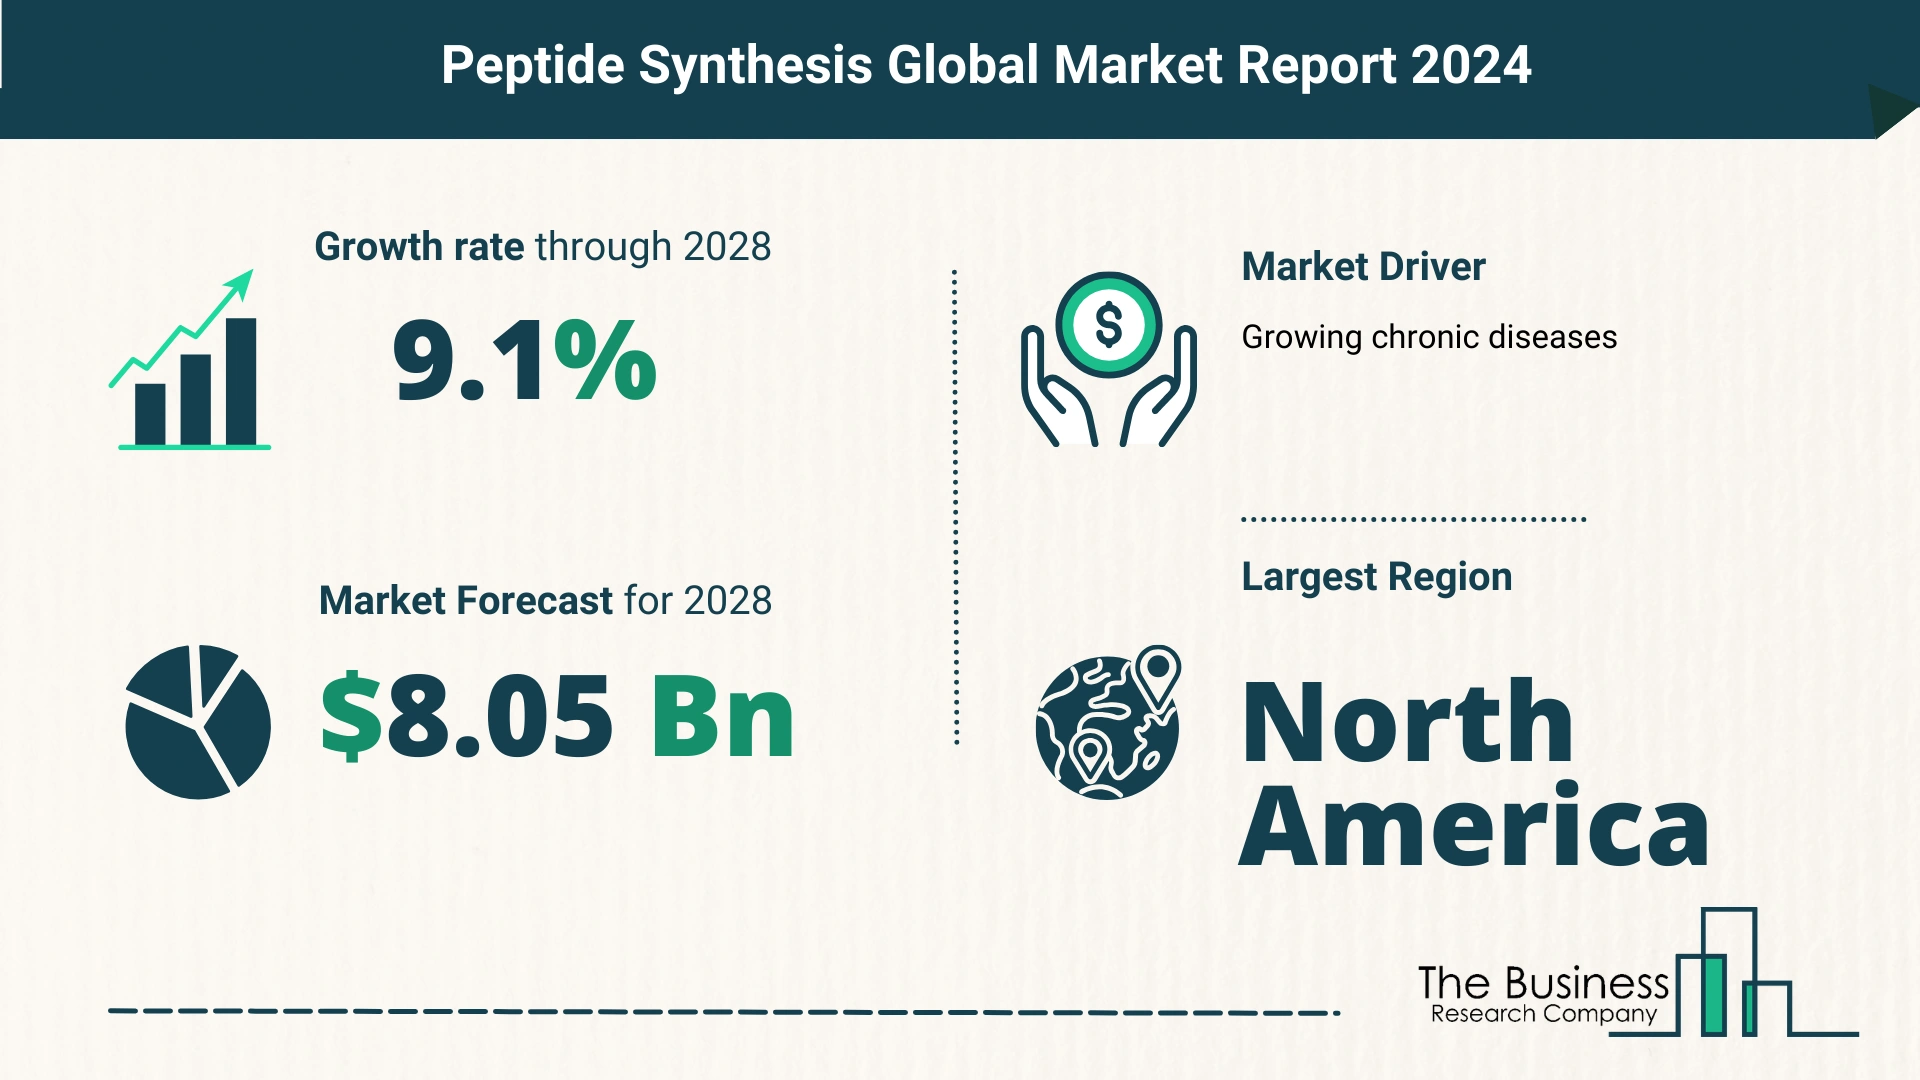 Top 5 Insights From The Peptide Synthesis Market Report 2024